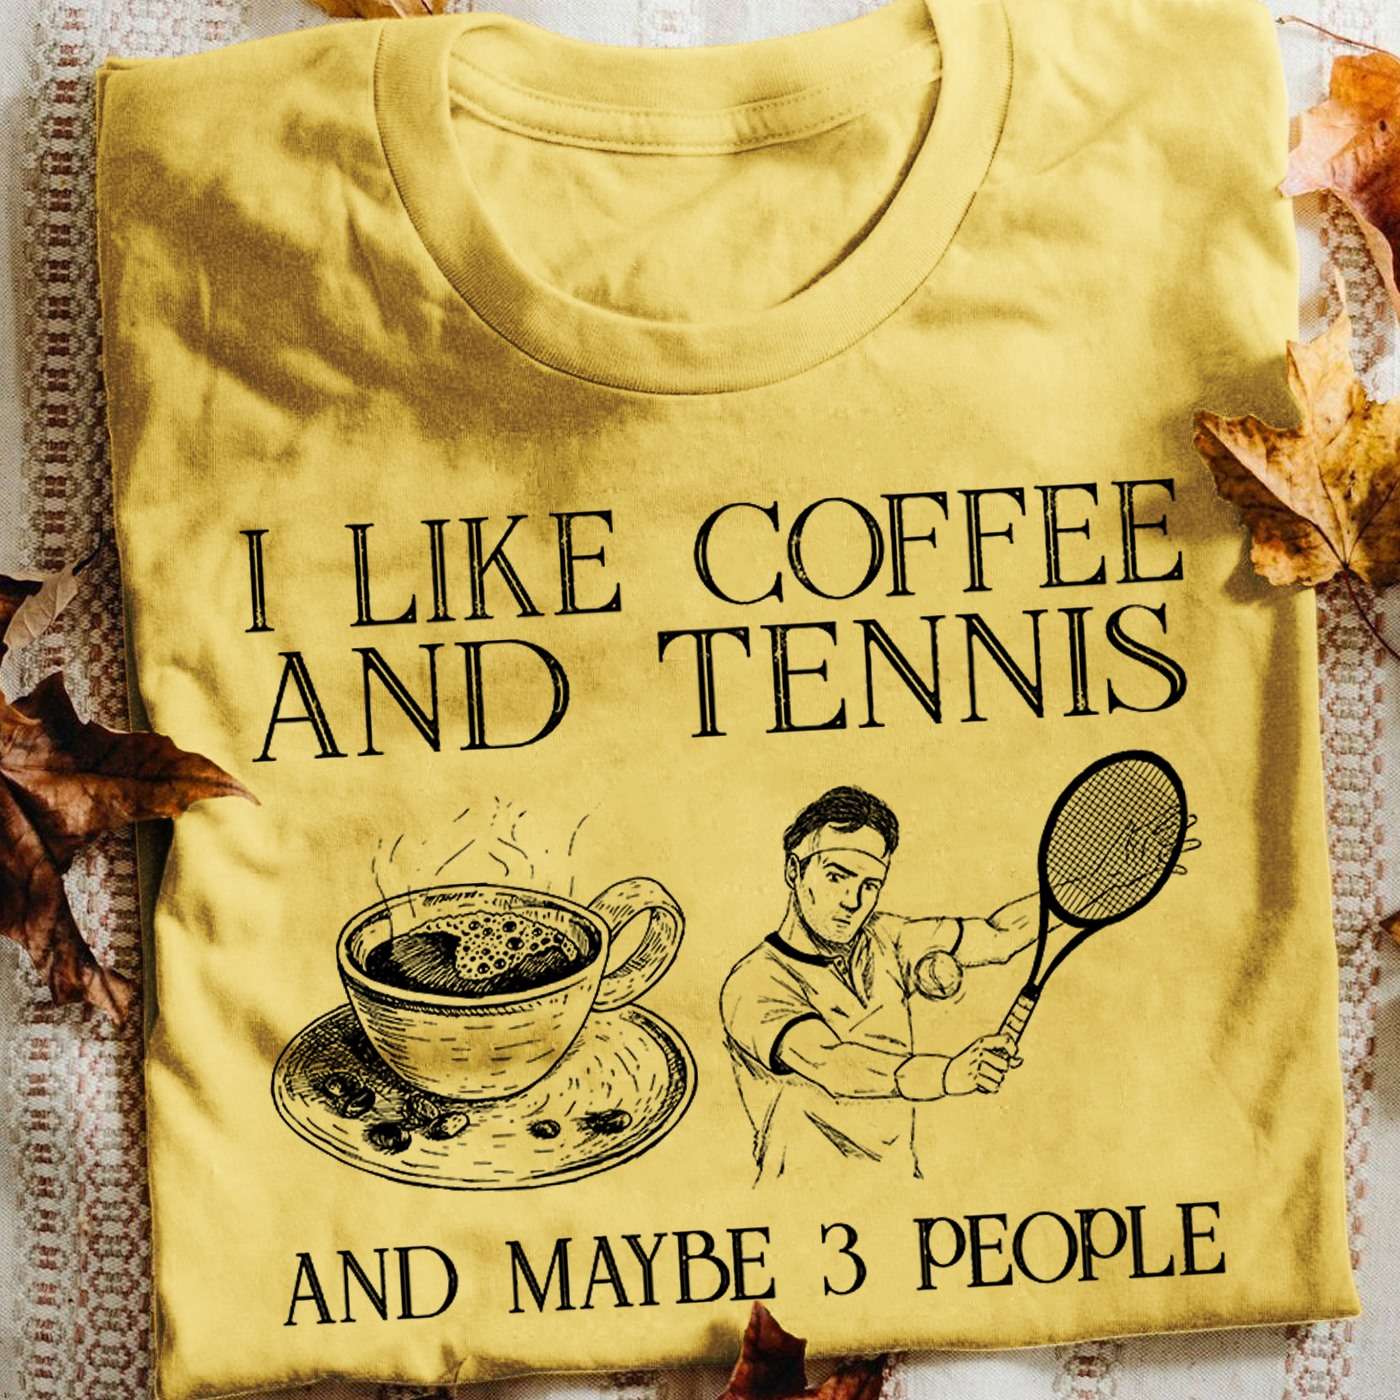 I like coffee and tennis and maybe 3 people